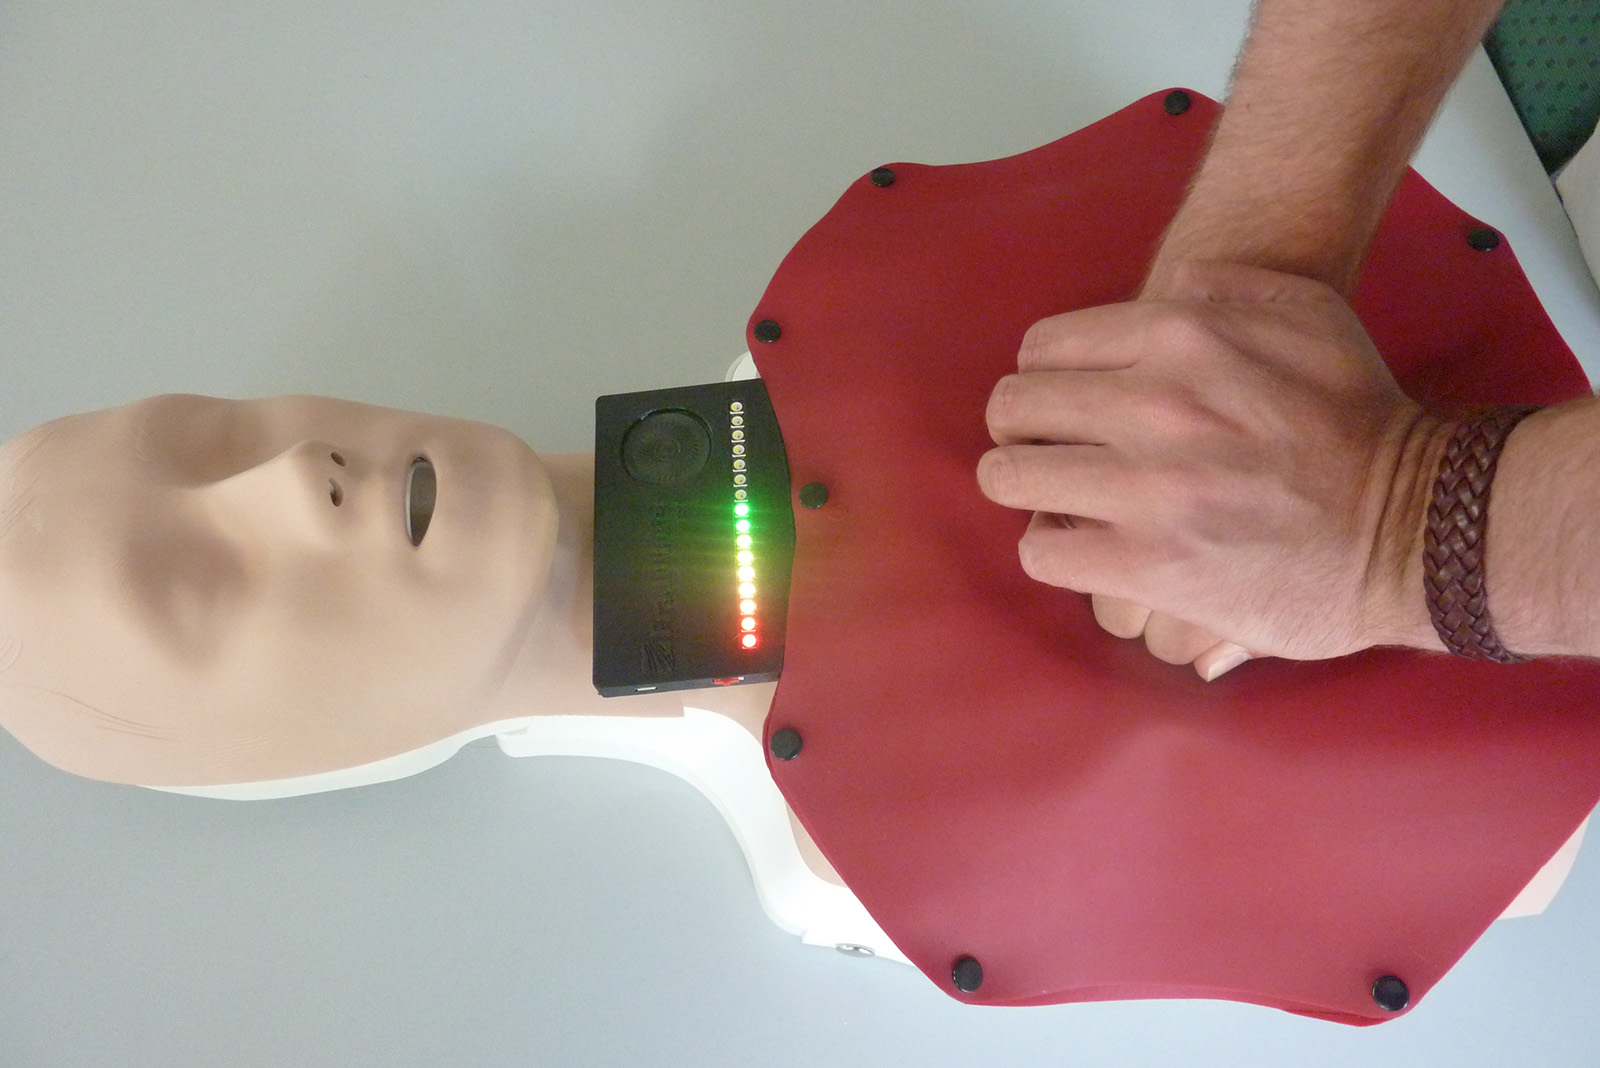 Illuminated LEDs at the upper edge of the mat indicate whether the first responder is administrating chest compressions correctly.